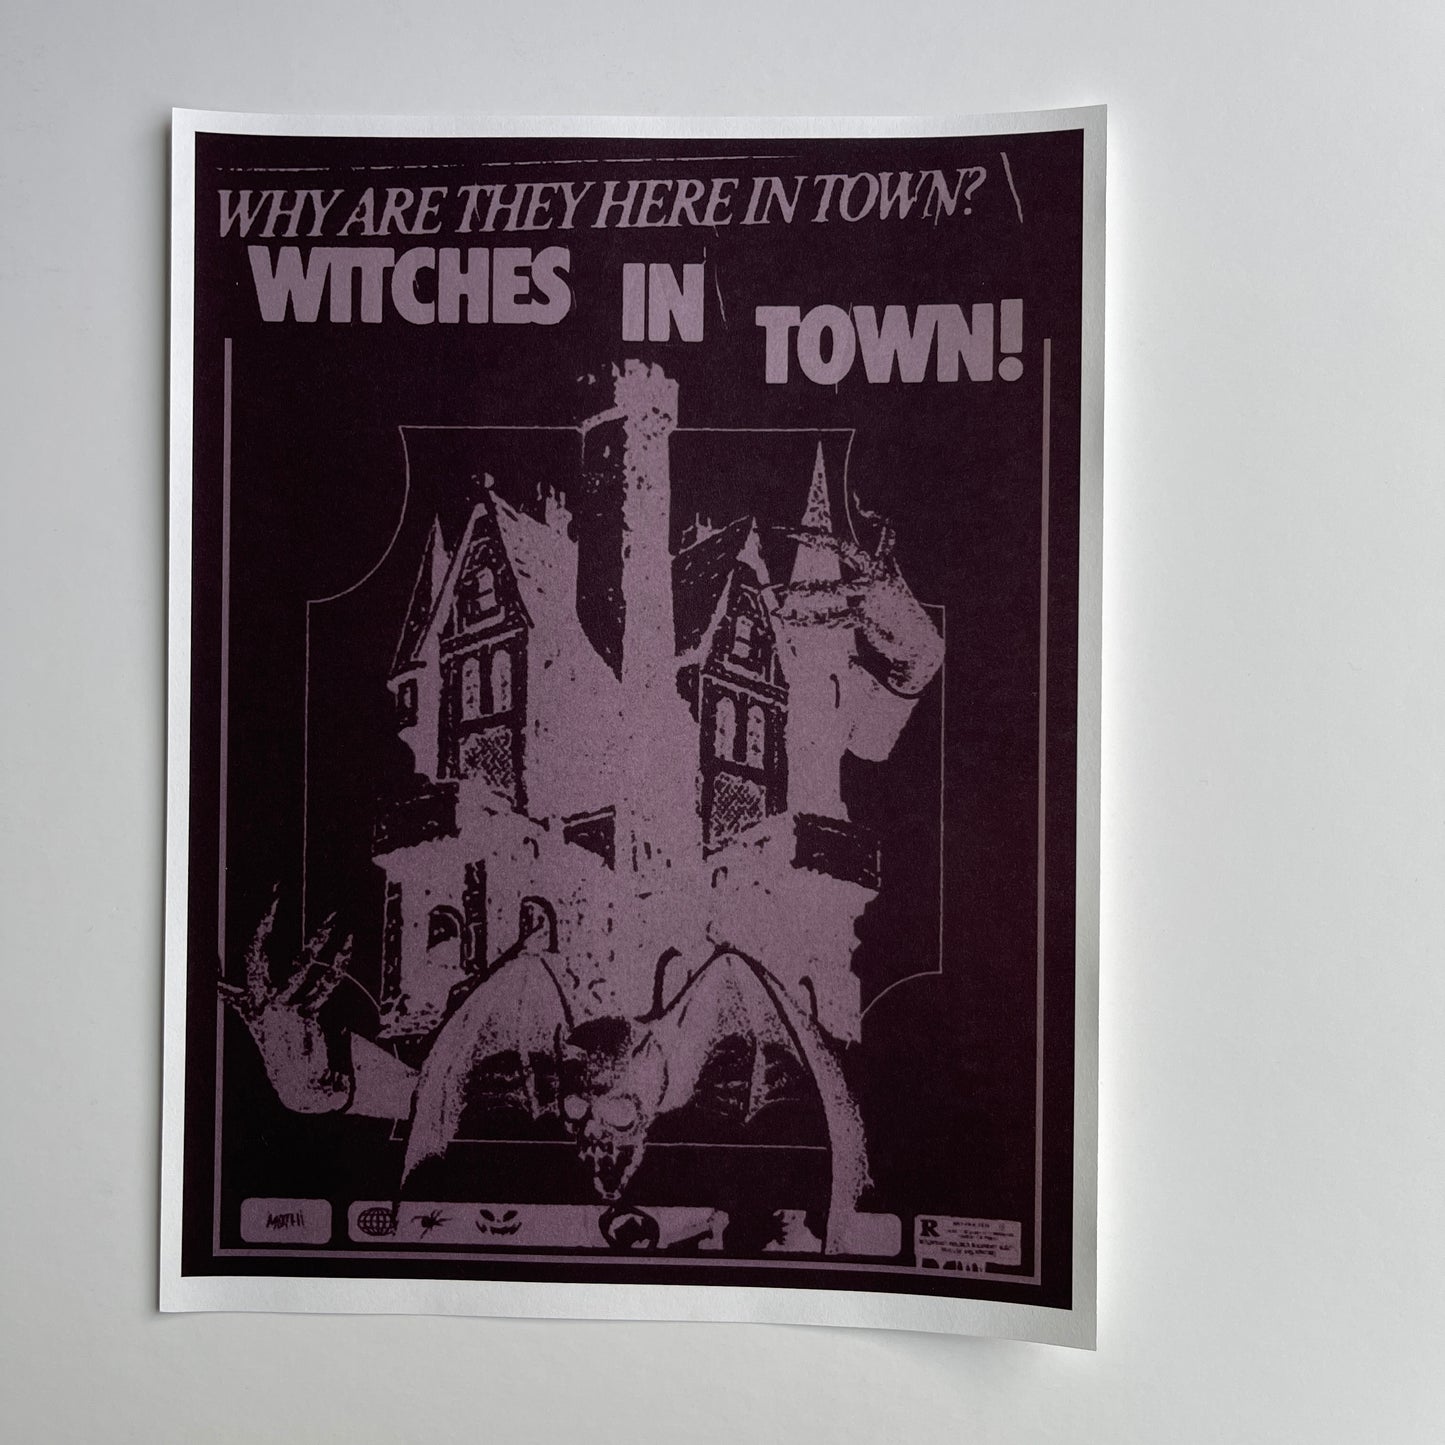 Witches in town poster